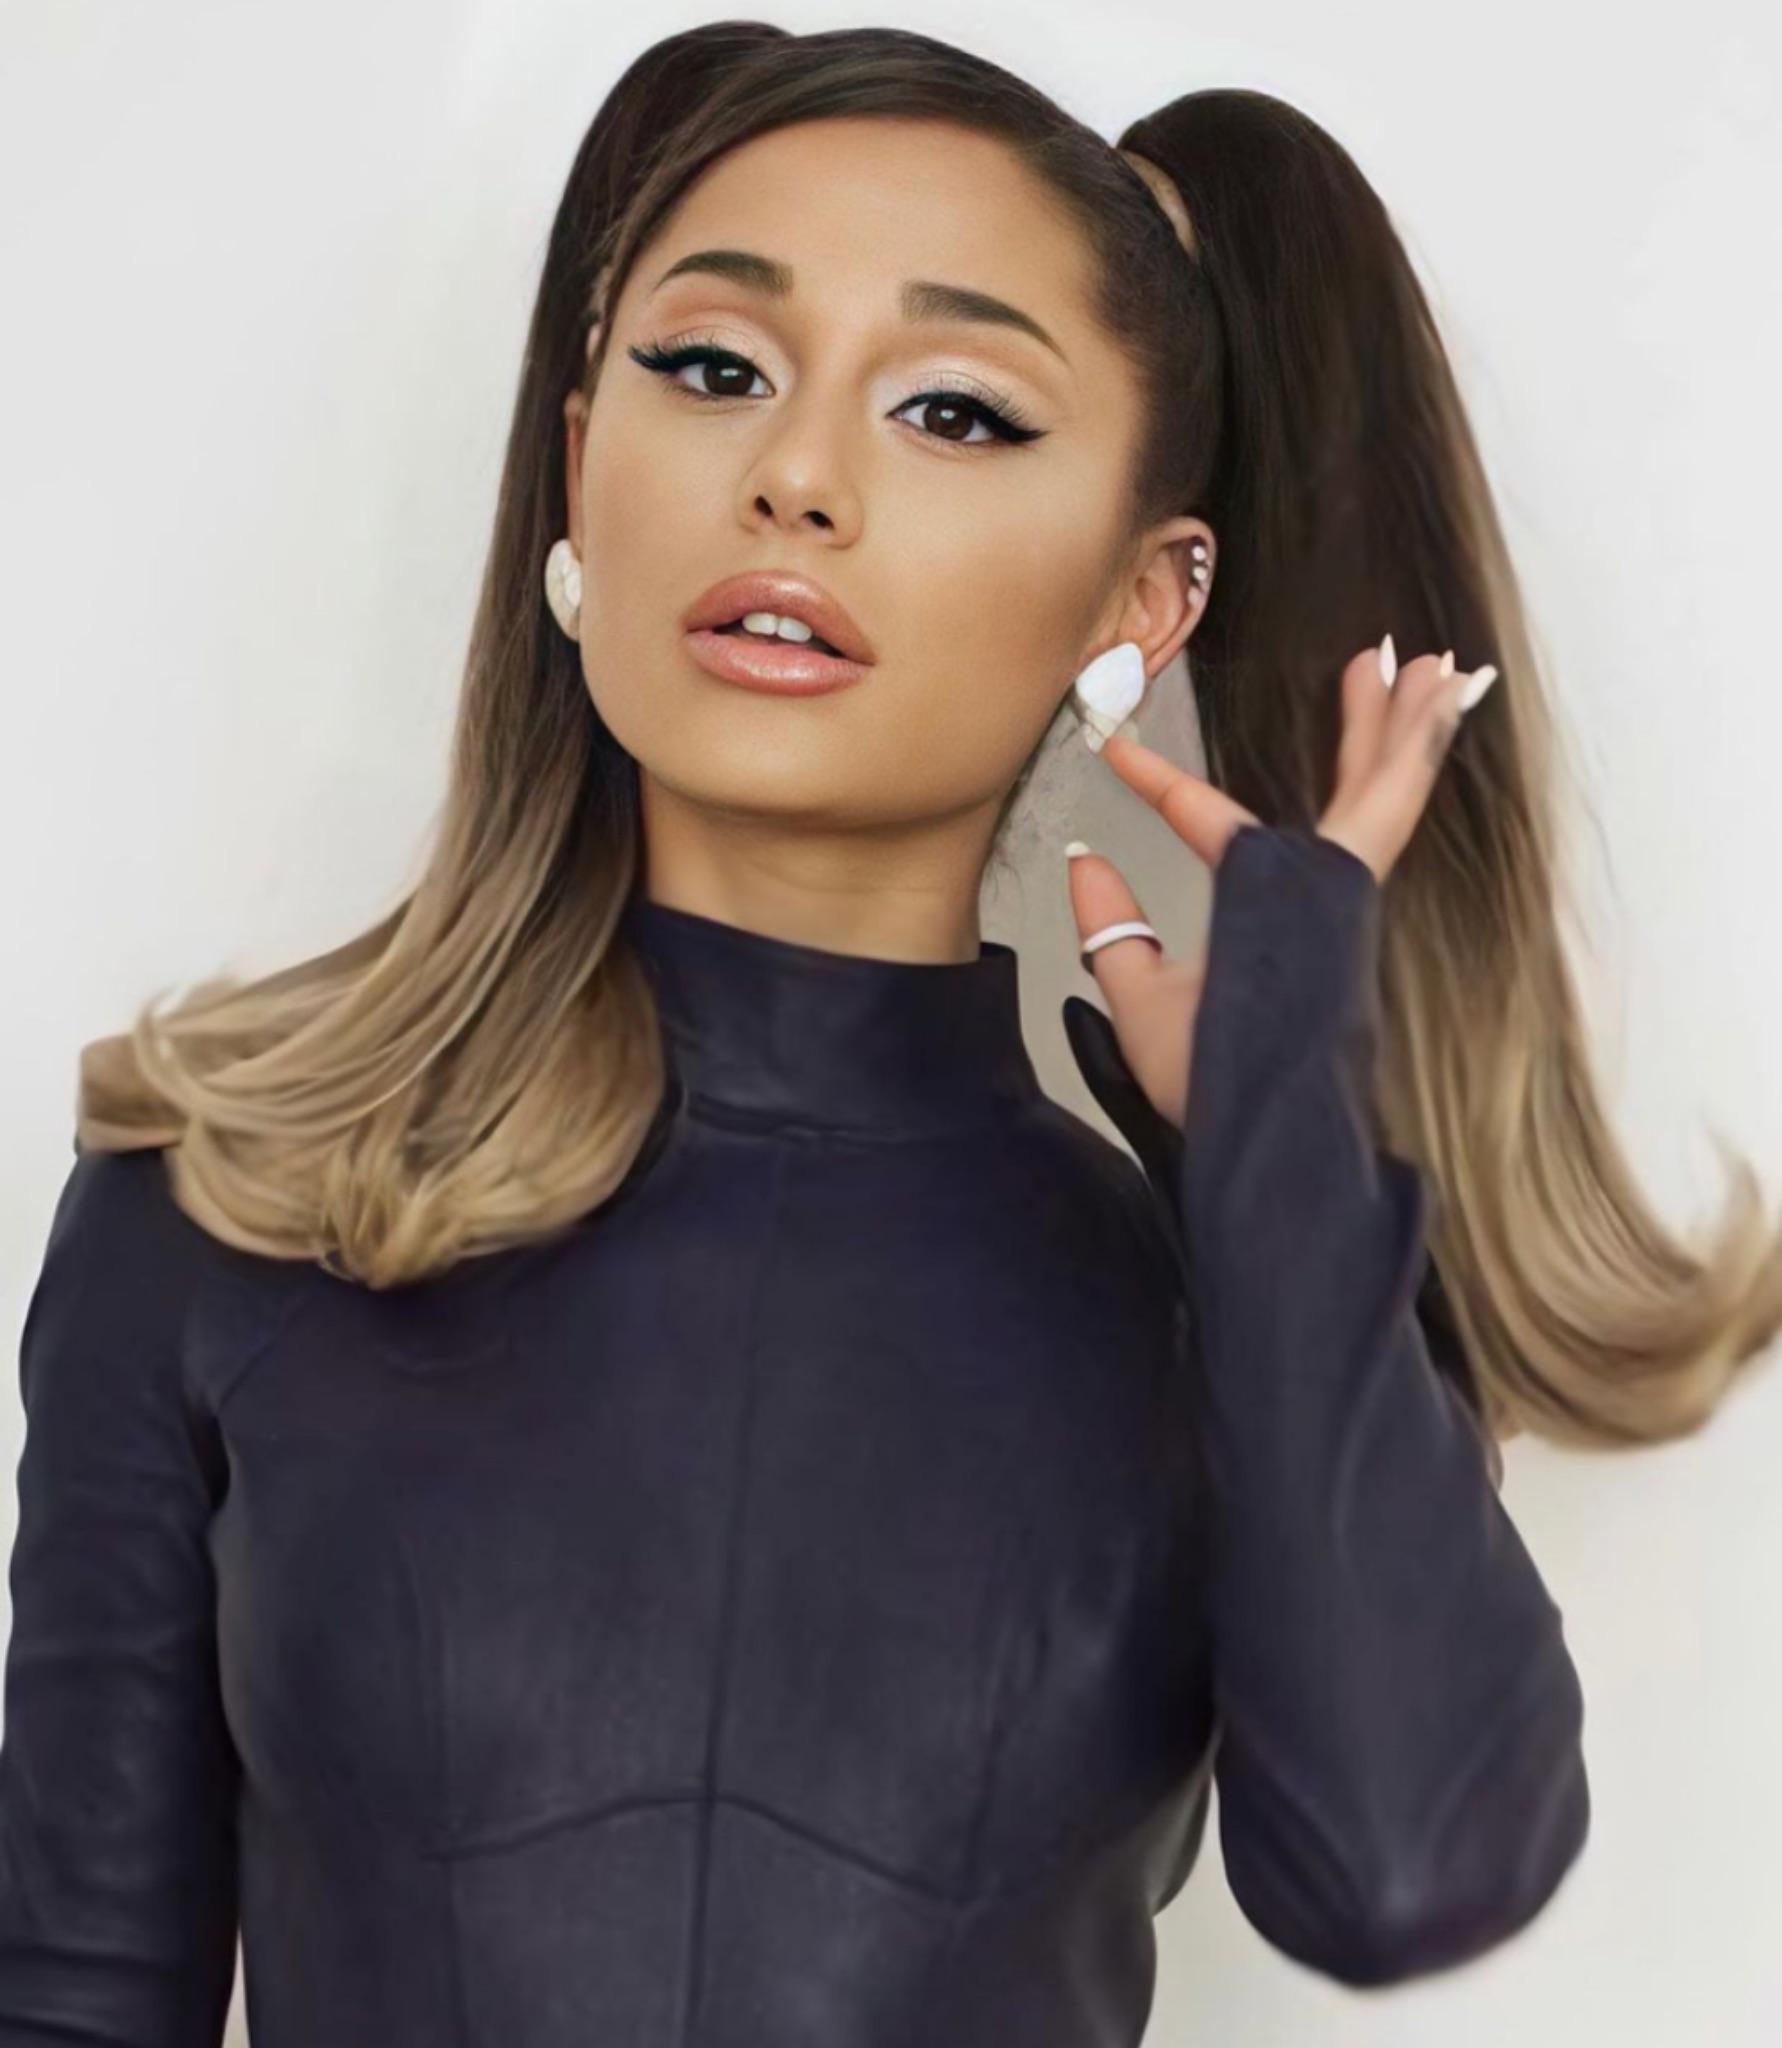 Ariana Grandes face always deserves to be covered in cum